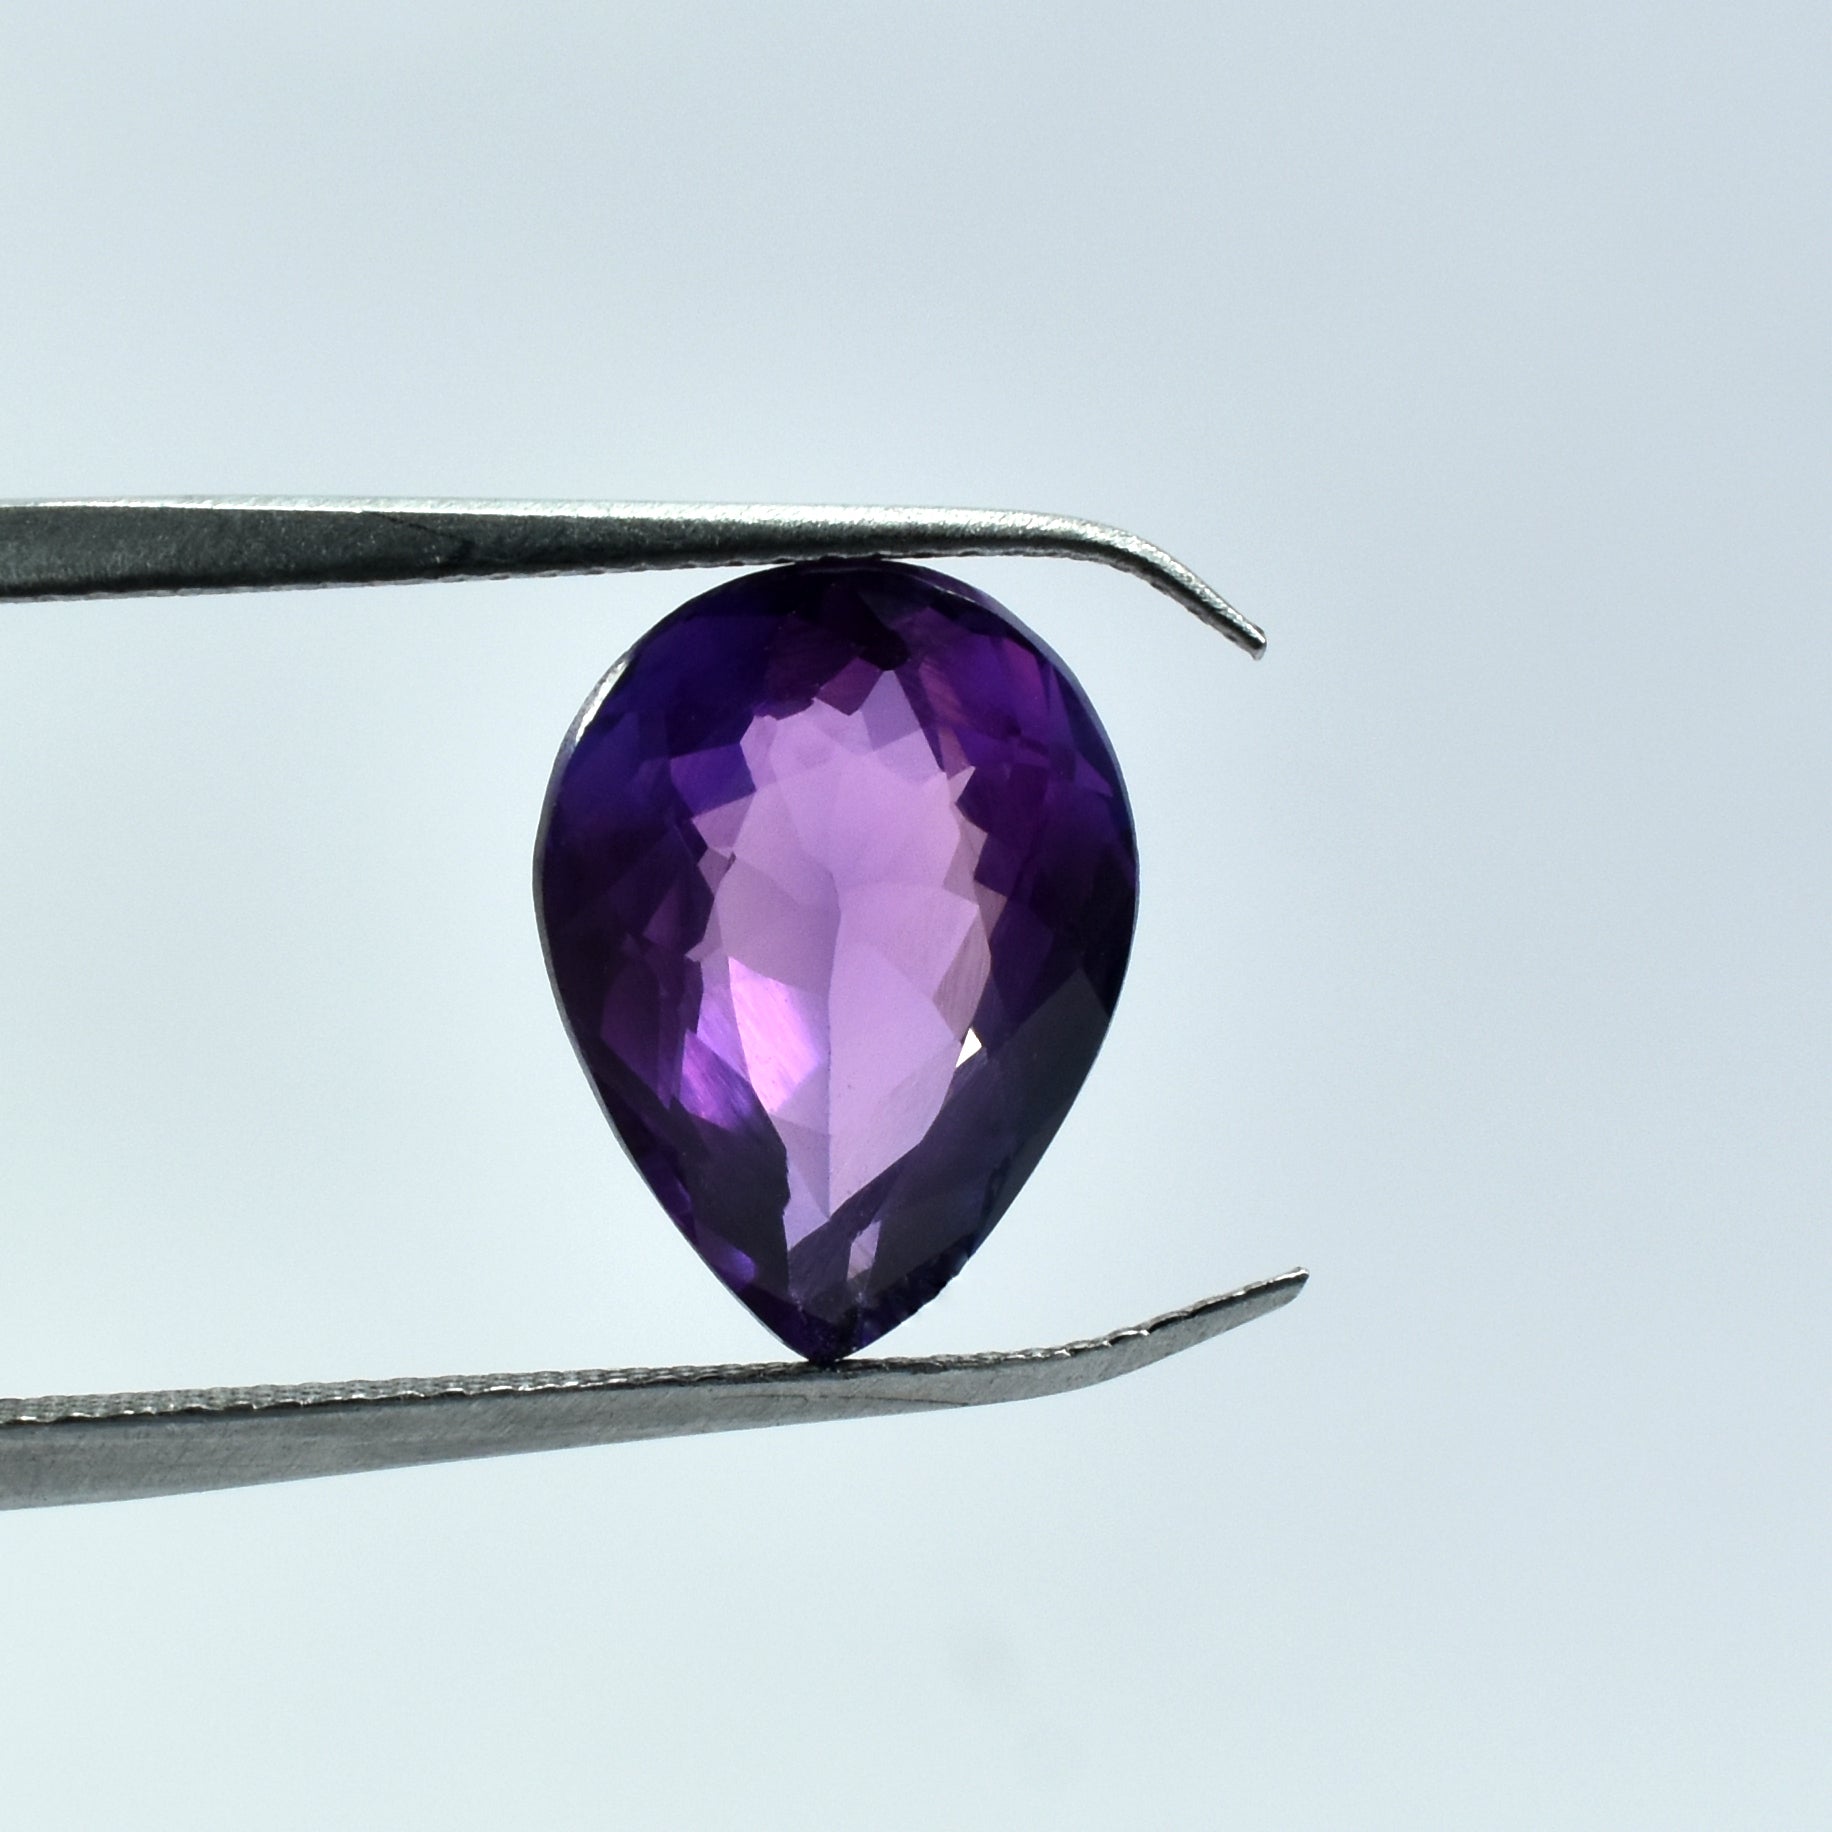 Brilliant Gift For Wife !!! Color Change Sapphire 9.65 Carat Pear Shape Natural Purple Sapphire Certified Loose Gemstone , Sapphire Jwelery , Sapphire On Sale